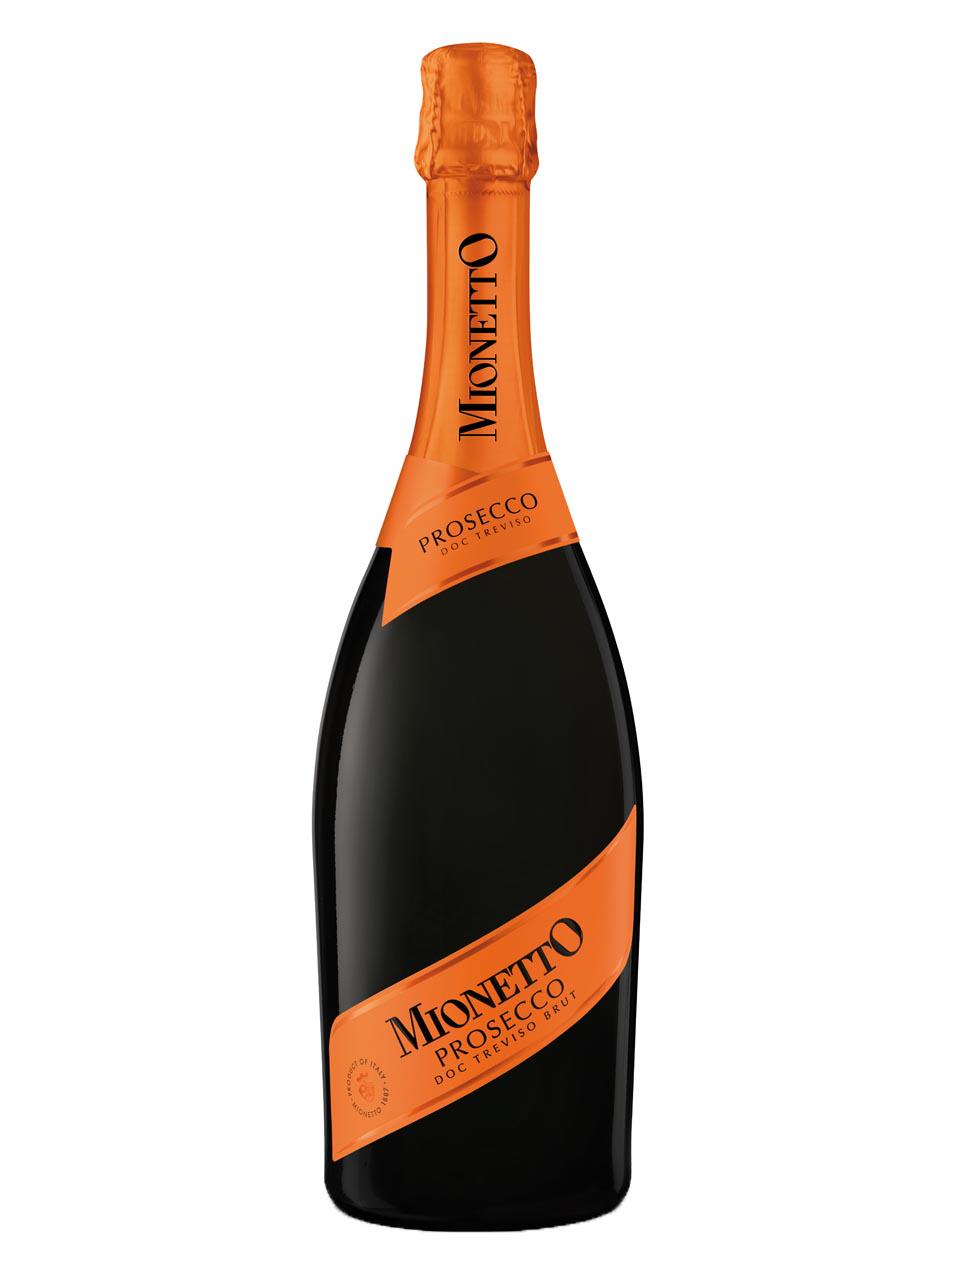 Prosecco, weiß Shopping Online Treviso, Mionetto, brut, DOC 0.75L Collection, Airport Frankfurt | Prestige